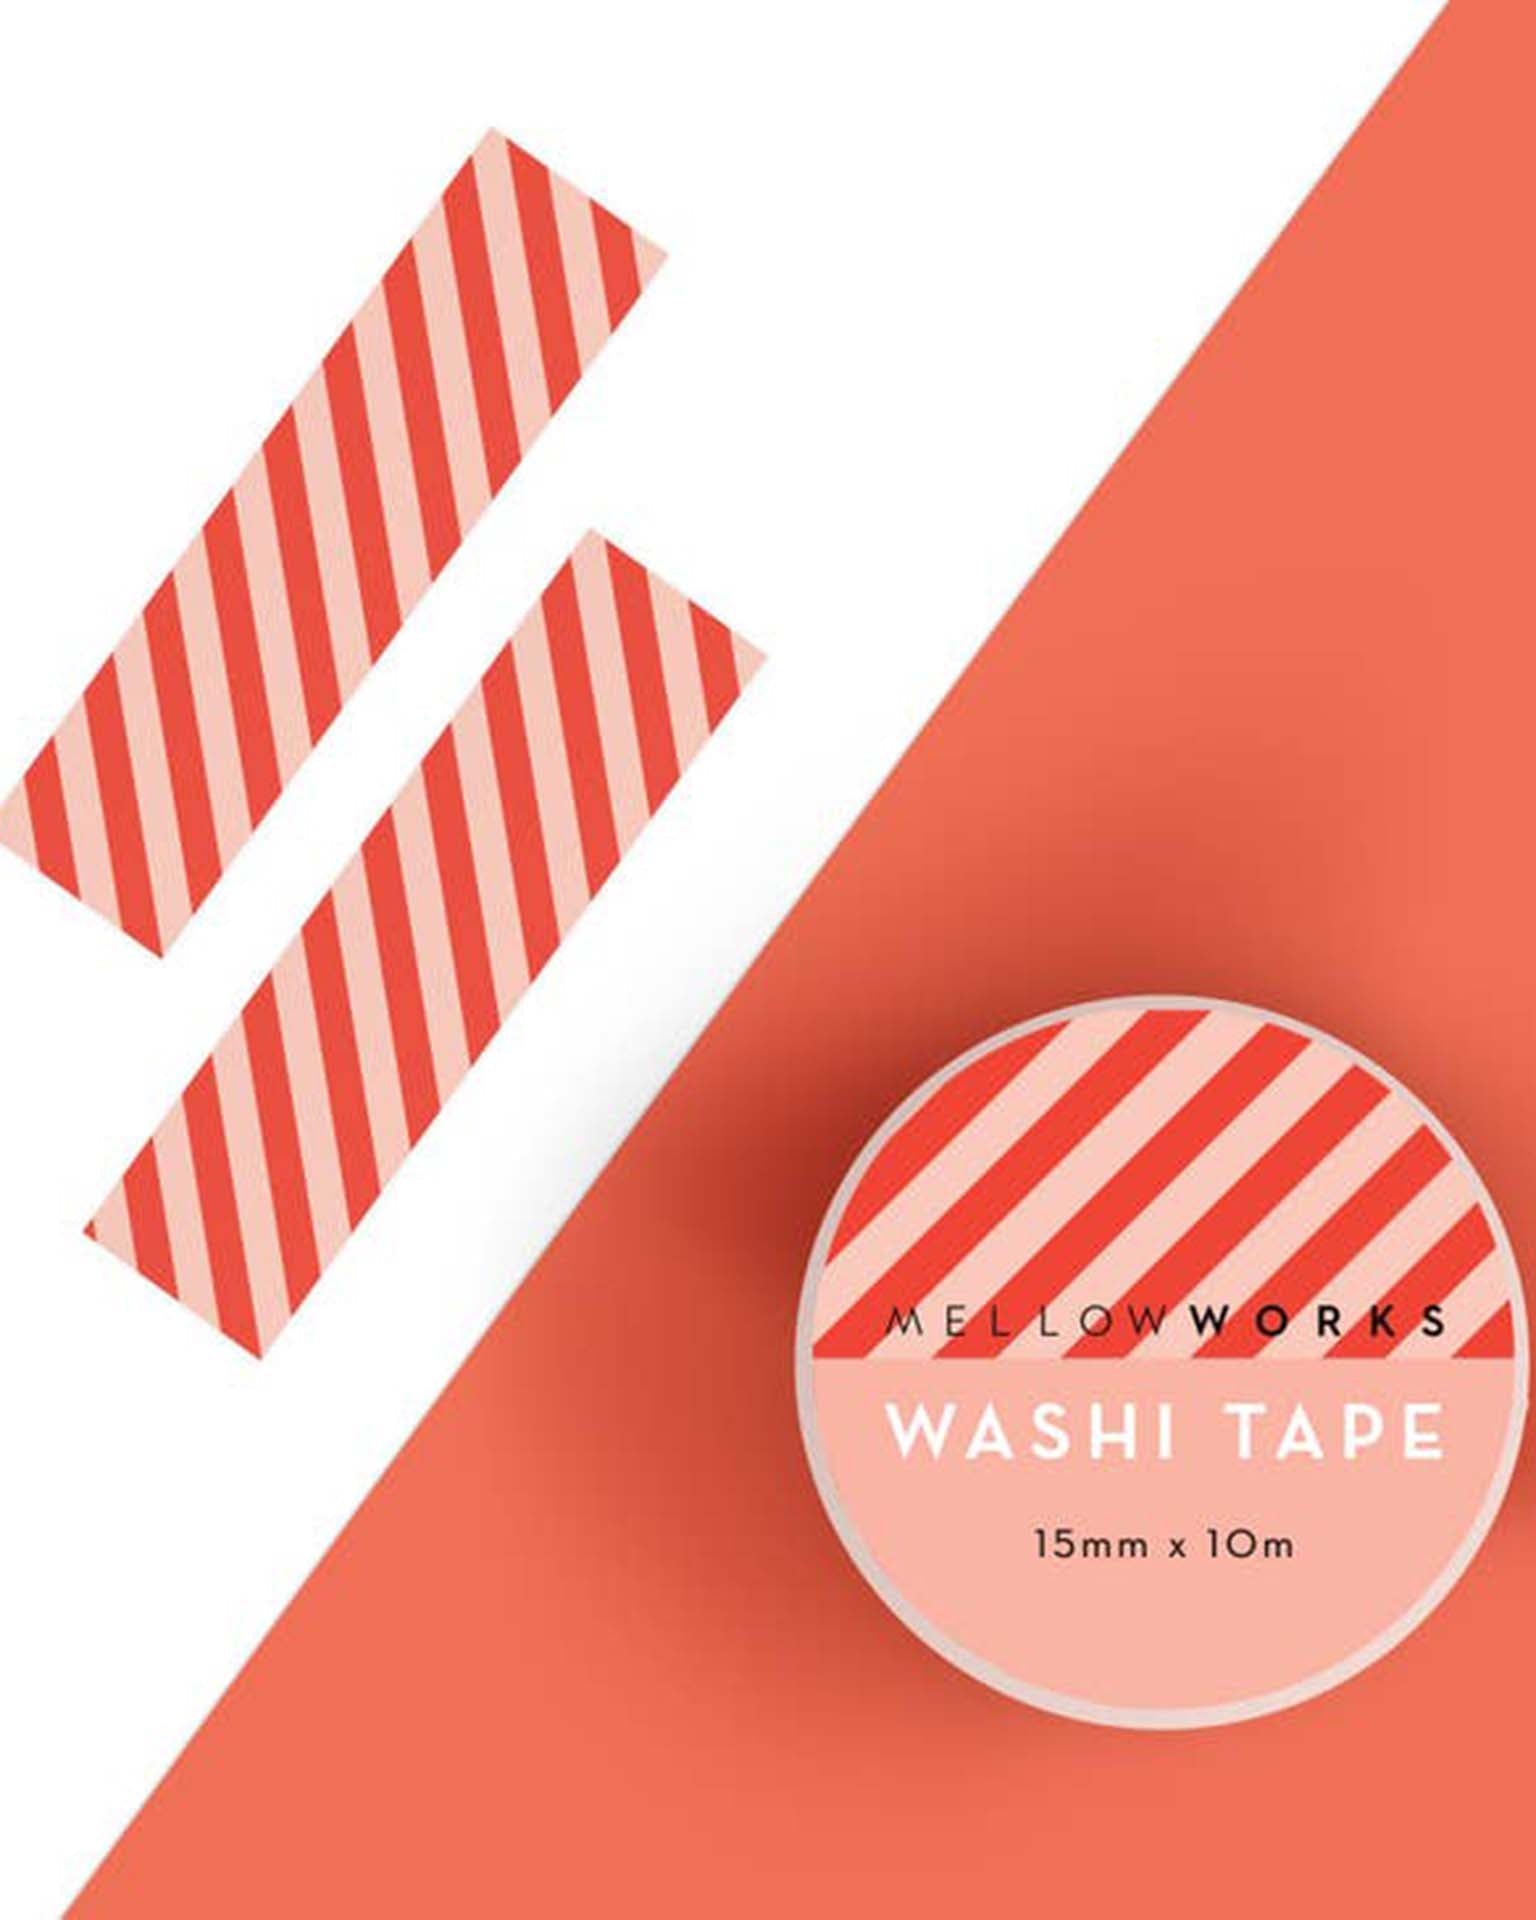 Little mellowworks Party candy cane stripe washi tape